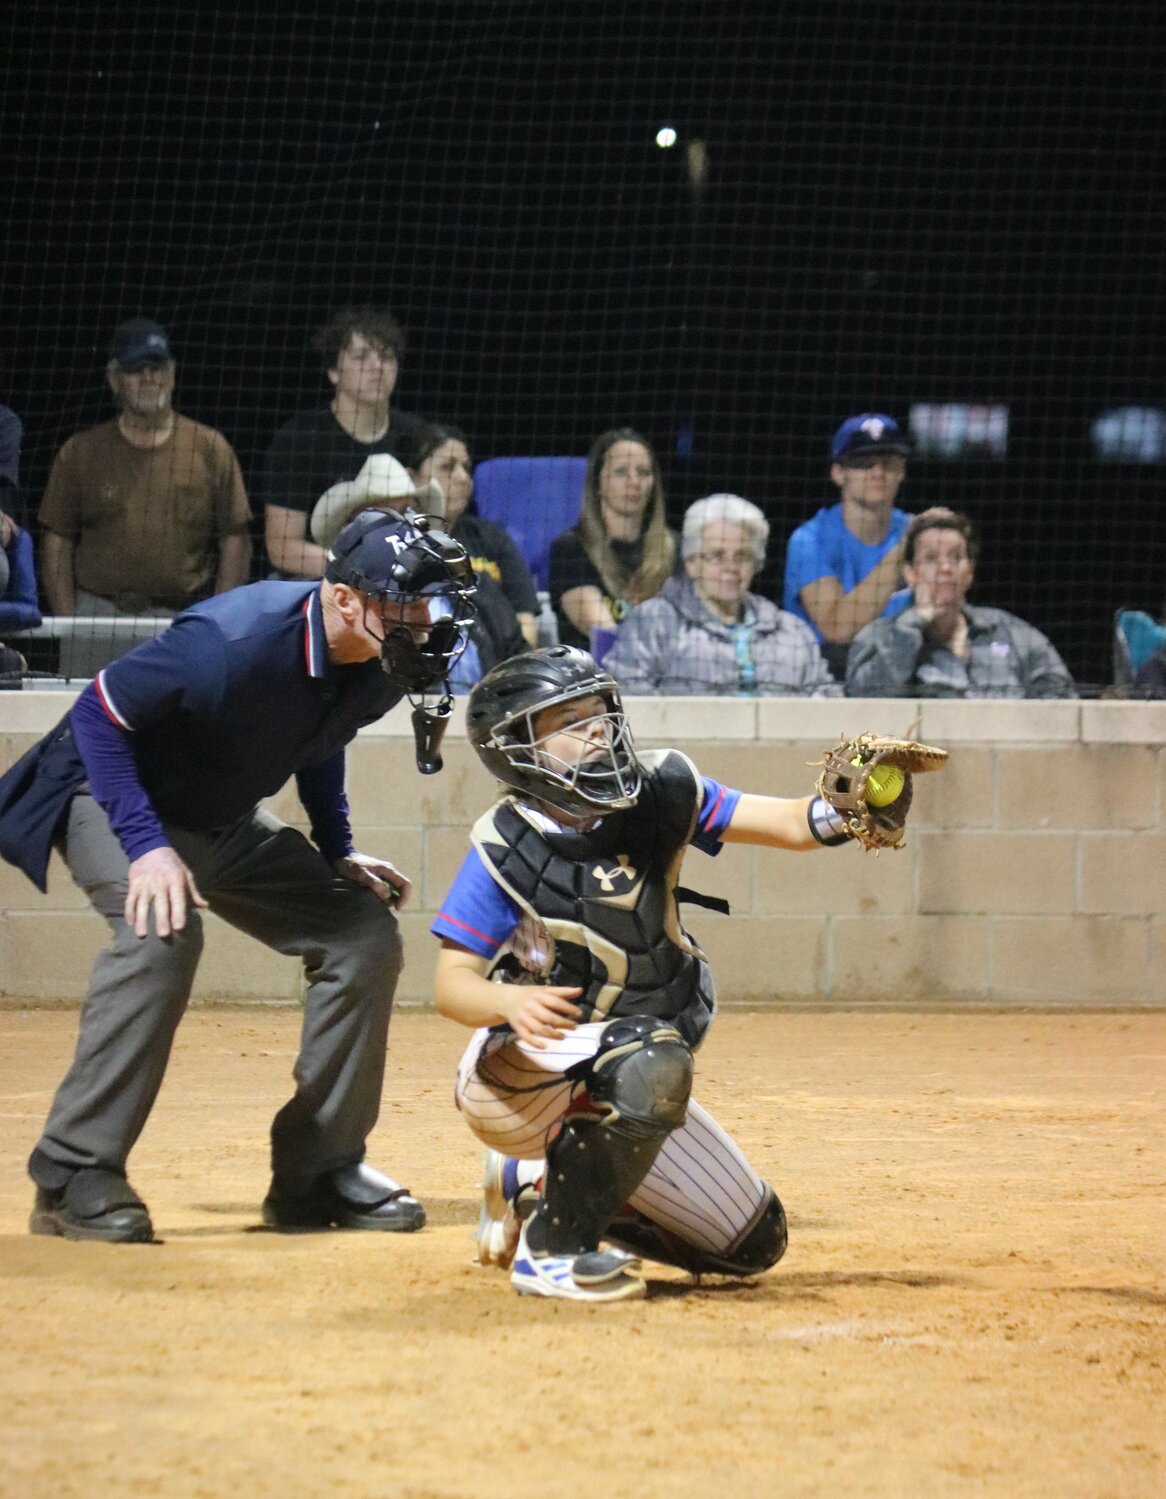 Larkin Spears catching for the Quitman Lady Bulldogs.